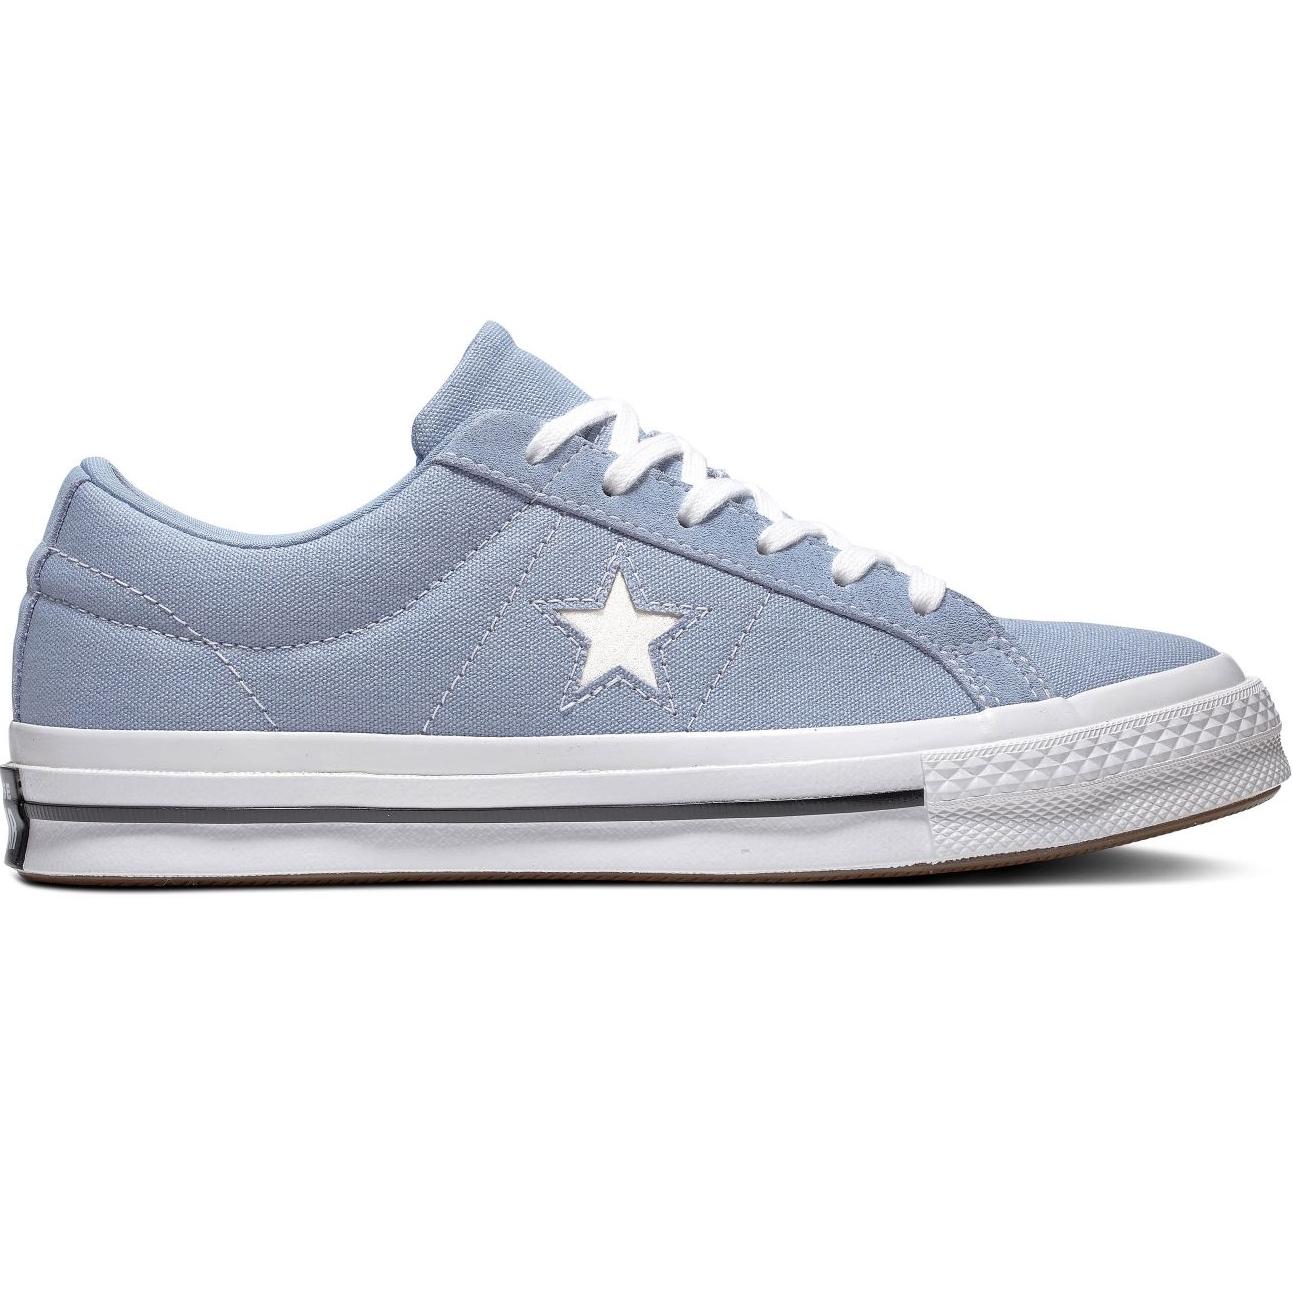 Converse One Star Canvas Sneaker